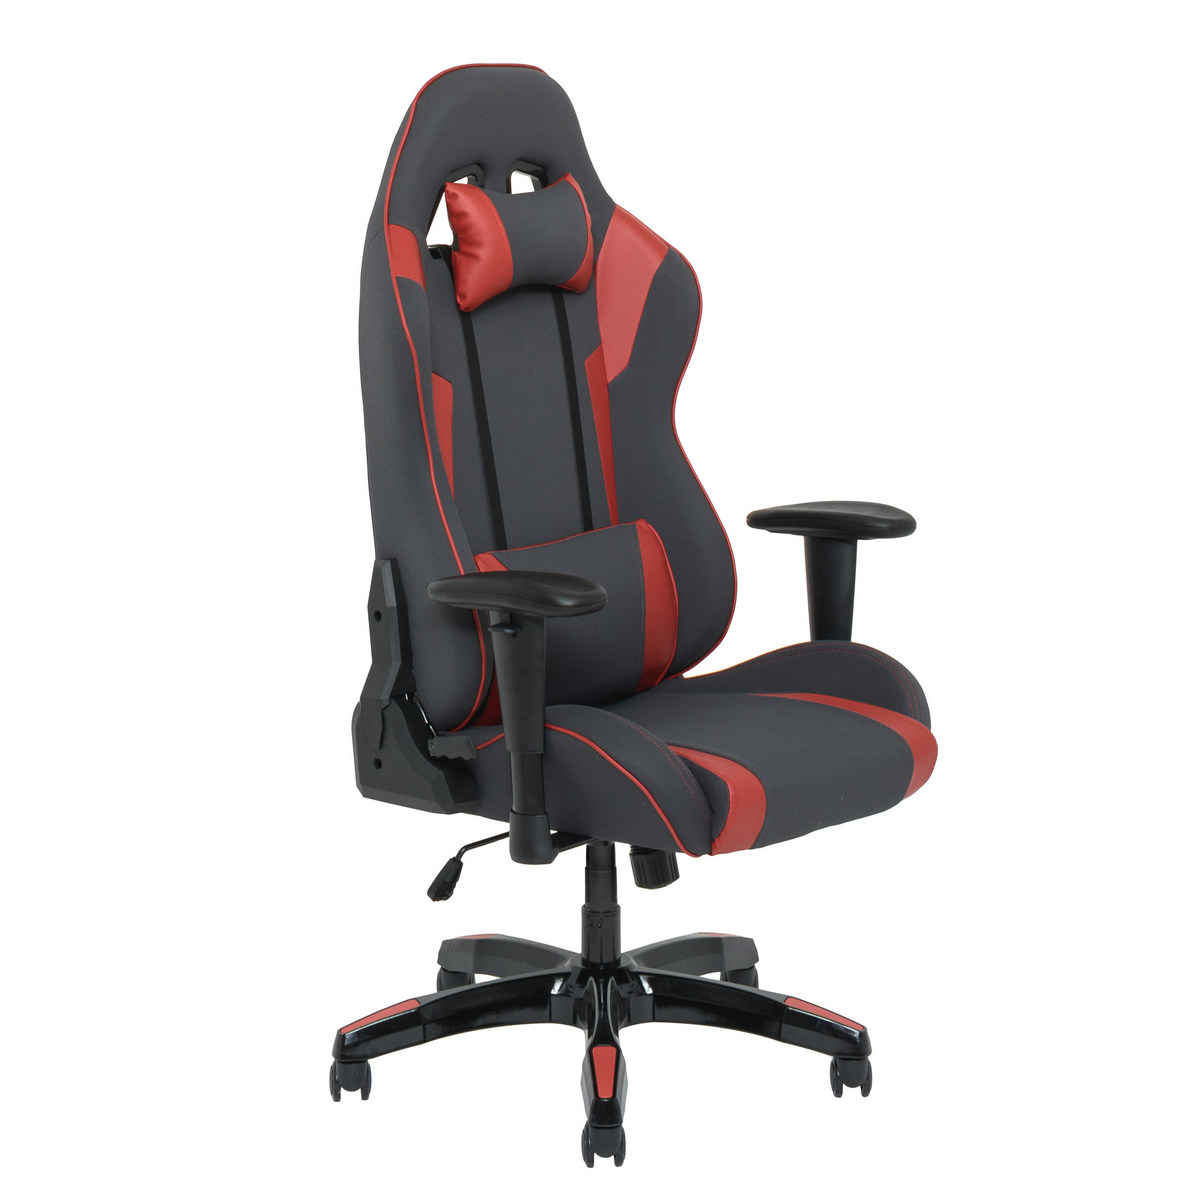 Corliving Lof-835-g Grey & Red High Back Ergonomic Gaming Chair, Height Adjustable Arms